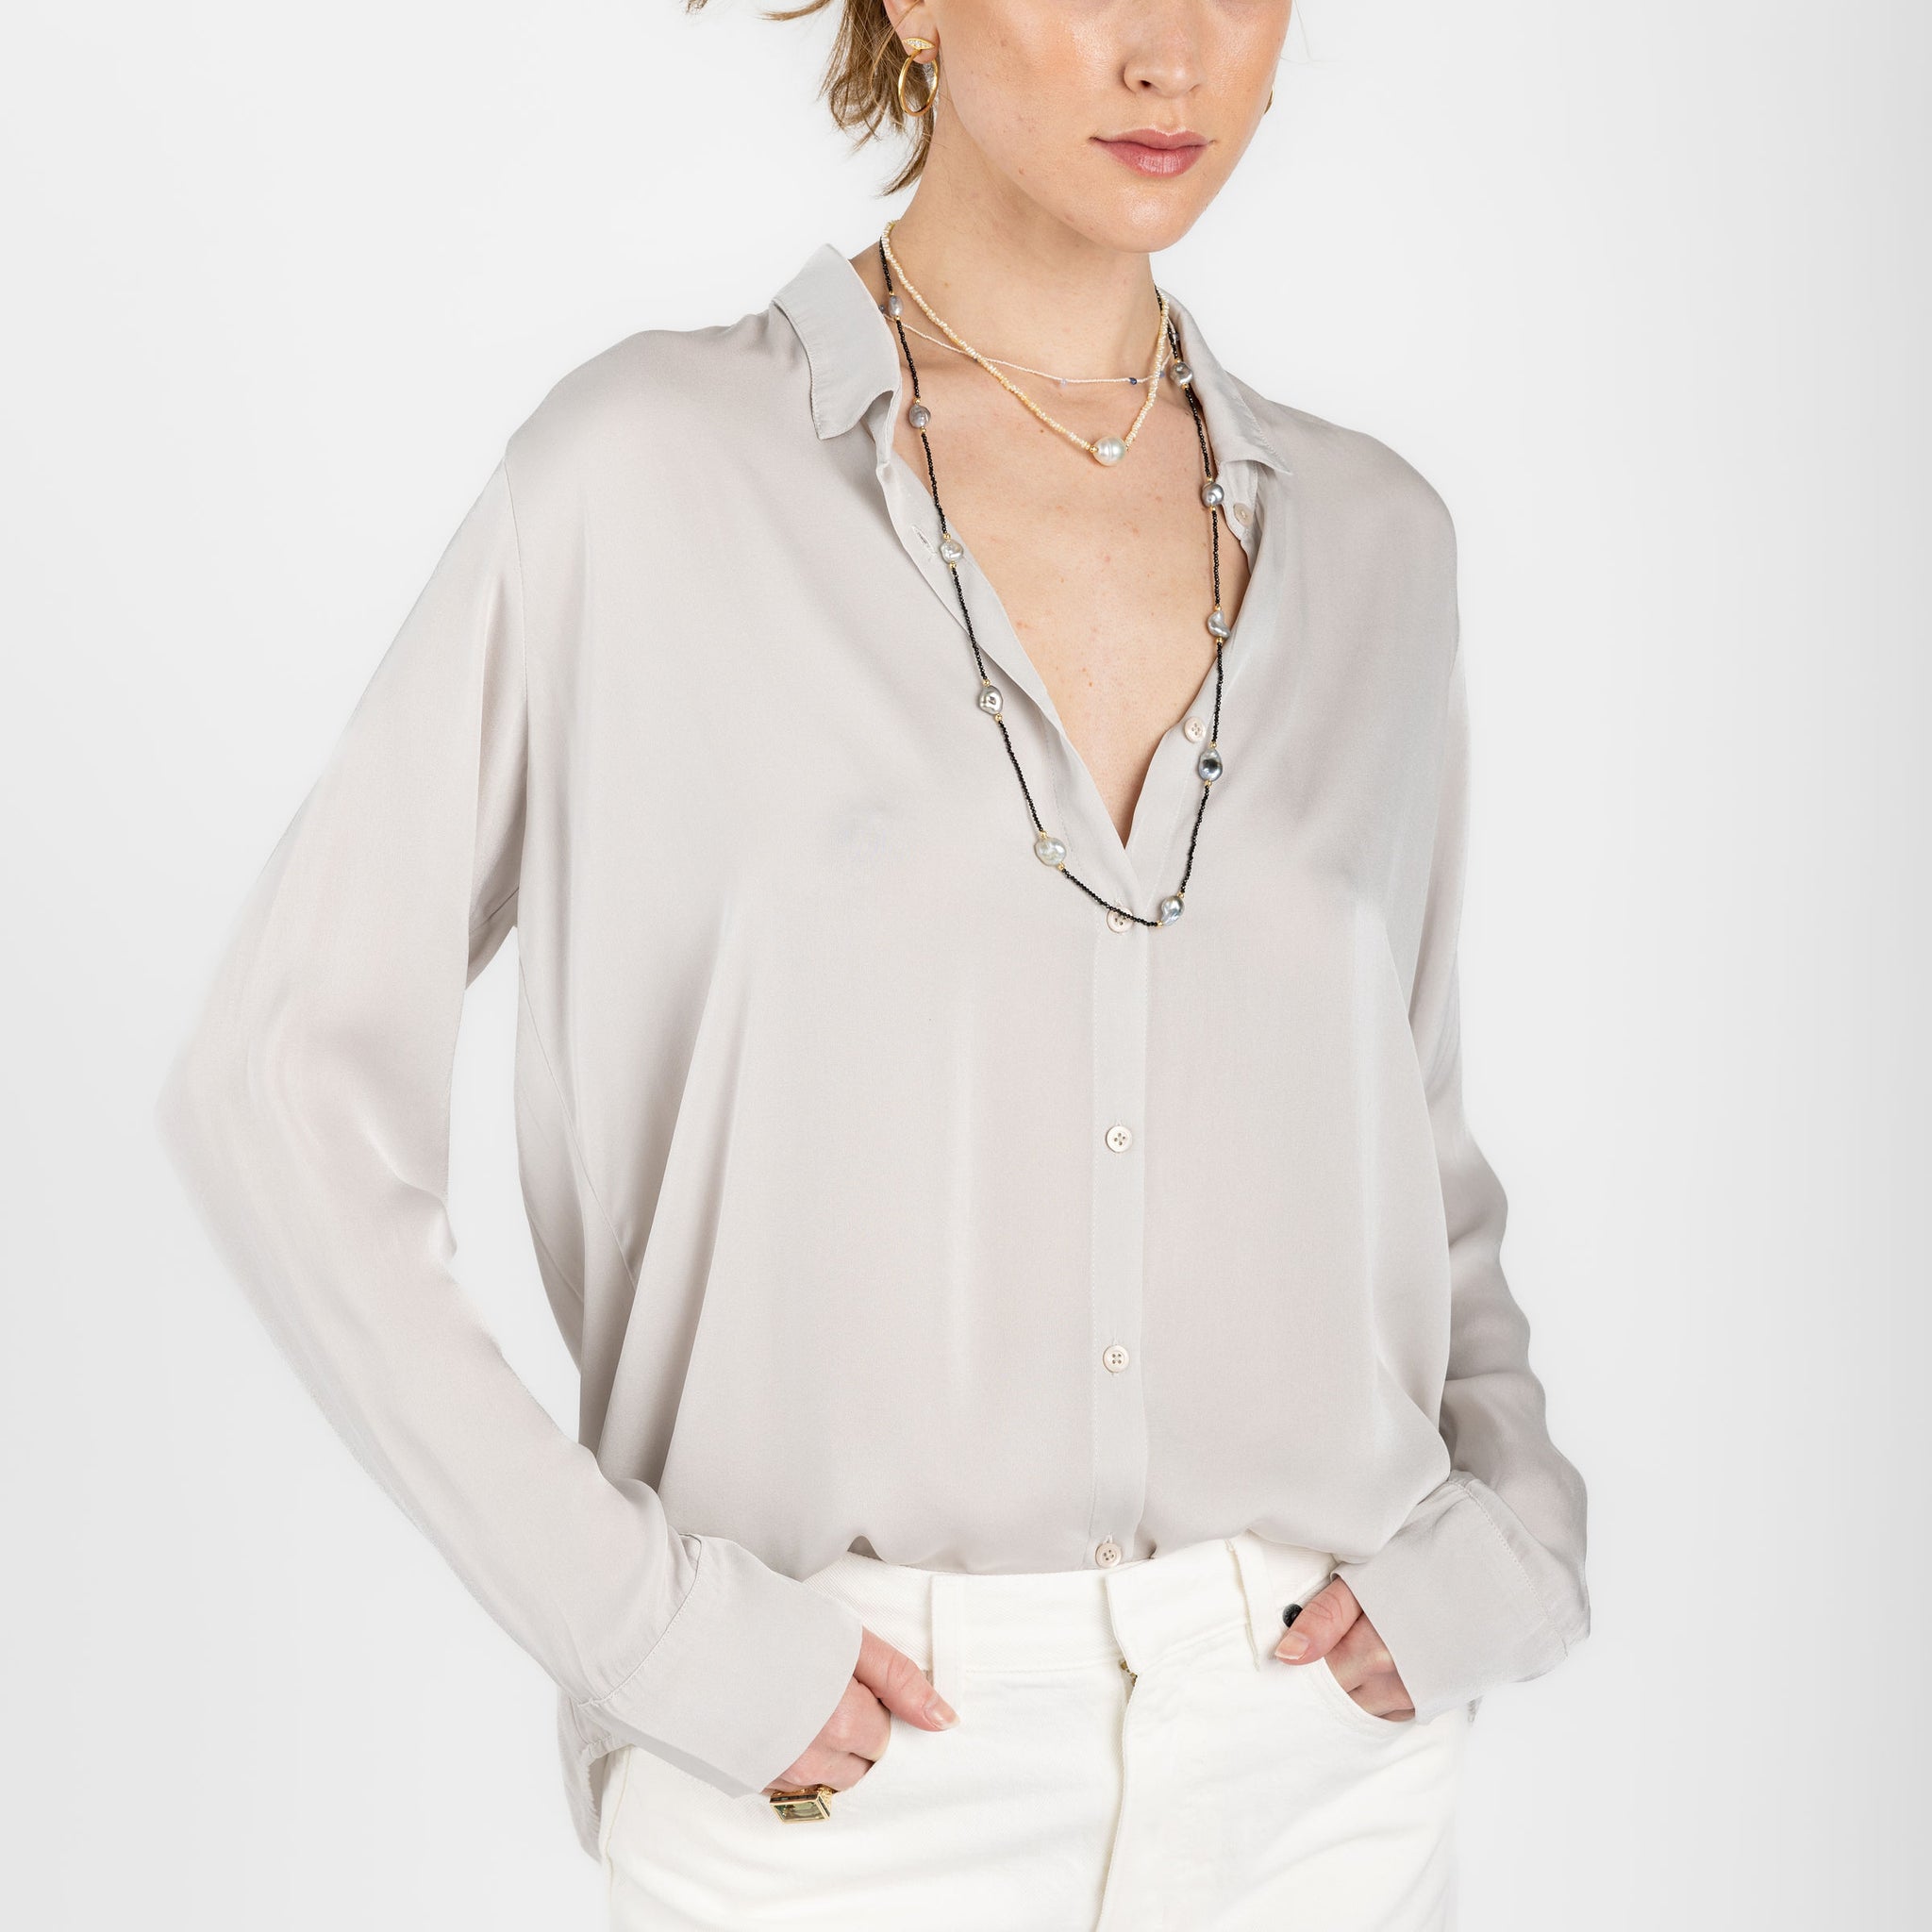 PRIVATE 0204 Smooth Silk Shirt in Pearl